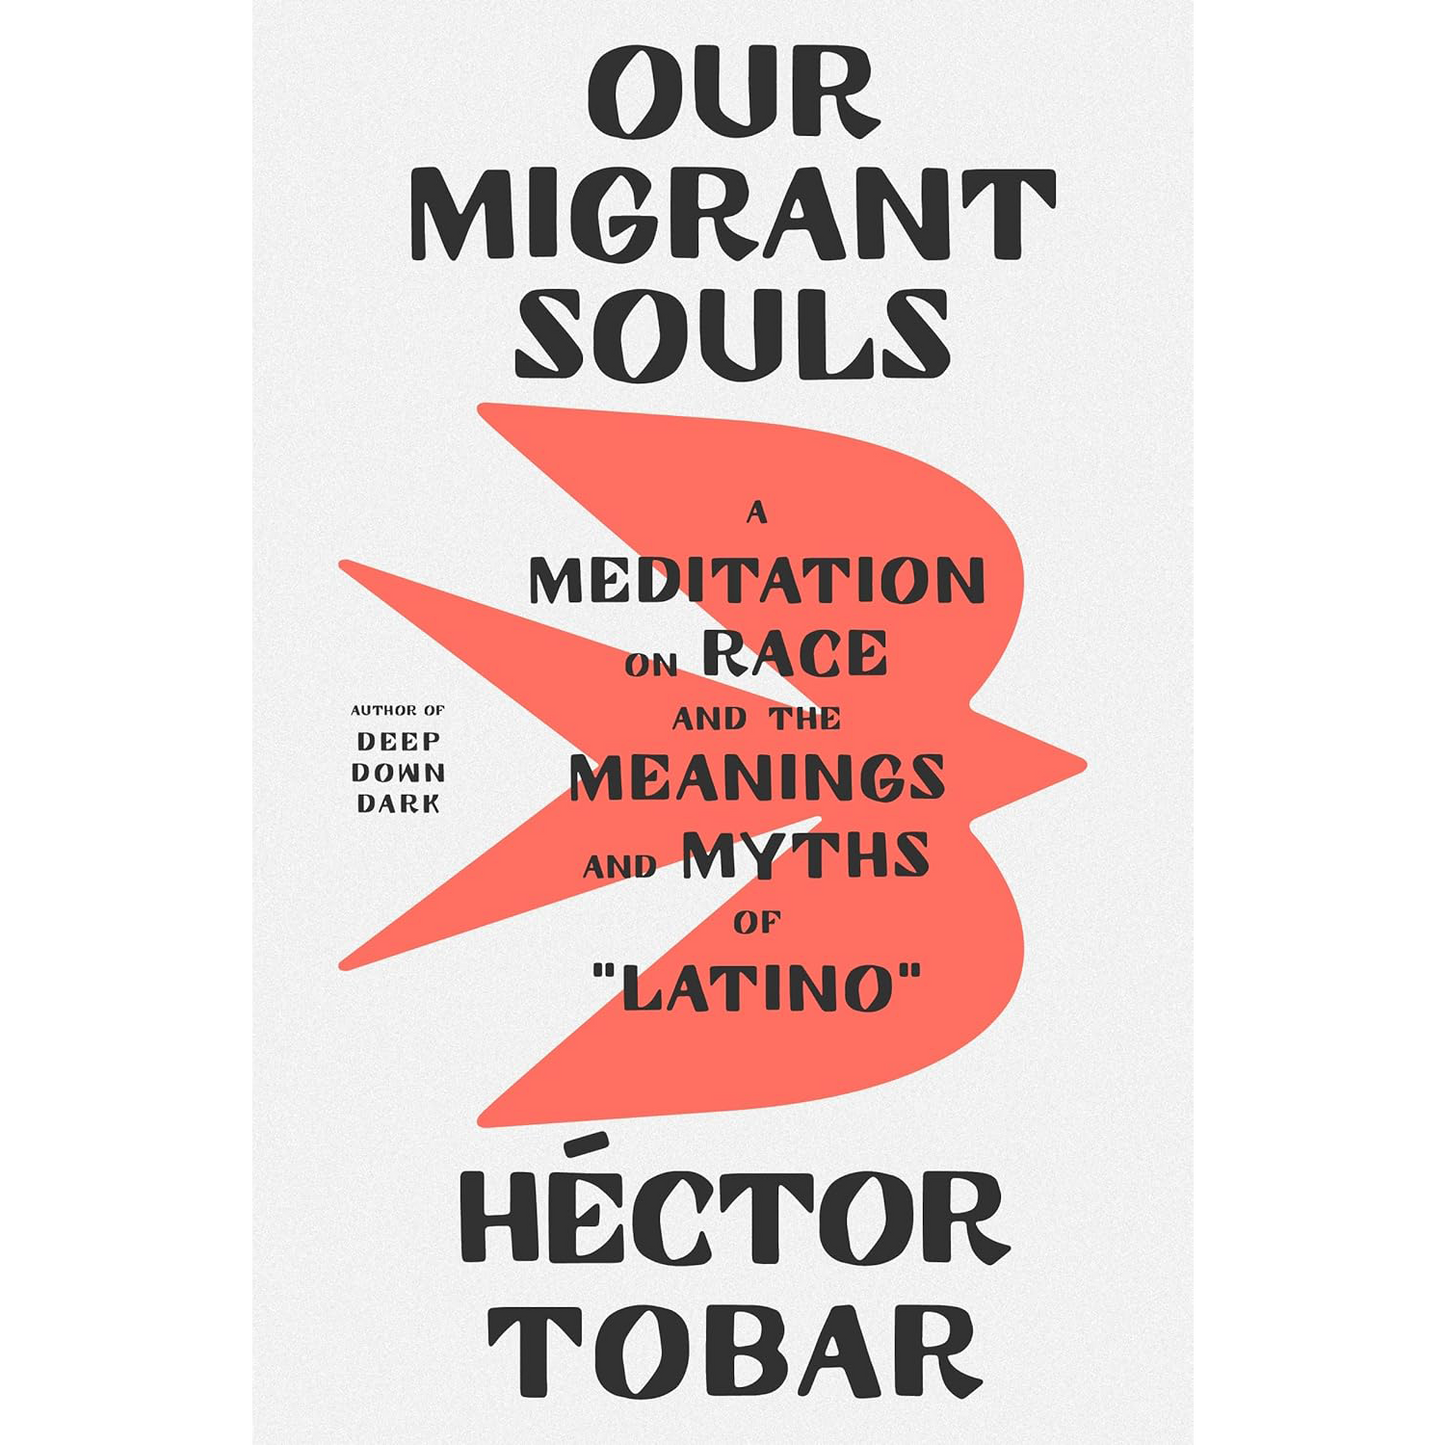 Our Migrant Souls: A Meditation on Race and the Meanings and Myths of “Latino”